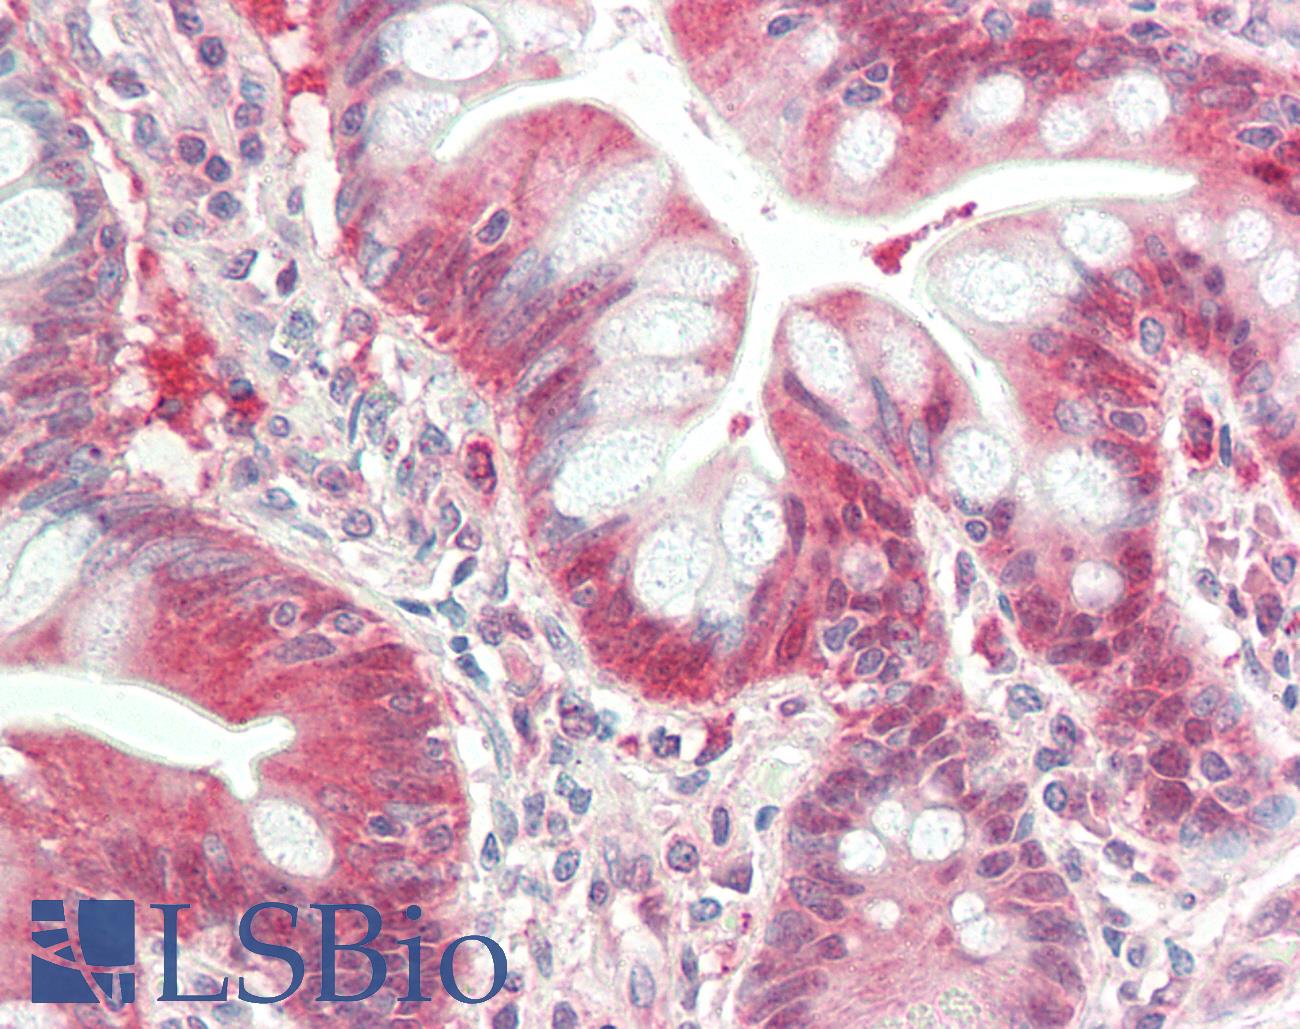 IRAK4 / IRAK-4 Antibody - Anti-IRAK4 / IRAK-4 antibody IHC staining of human small intestine. Immunohistochemistry of formalin-fixed, paraffin-embedded tissue after heat-induced antigen retrieval. Antibody dilution 1:50.